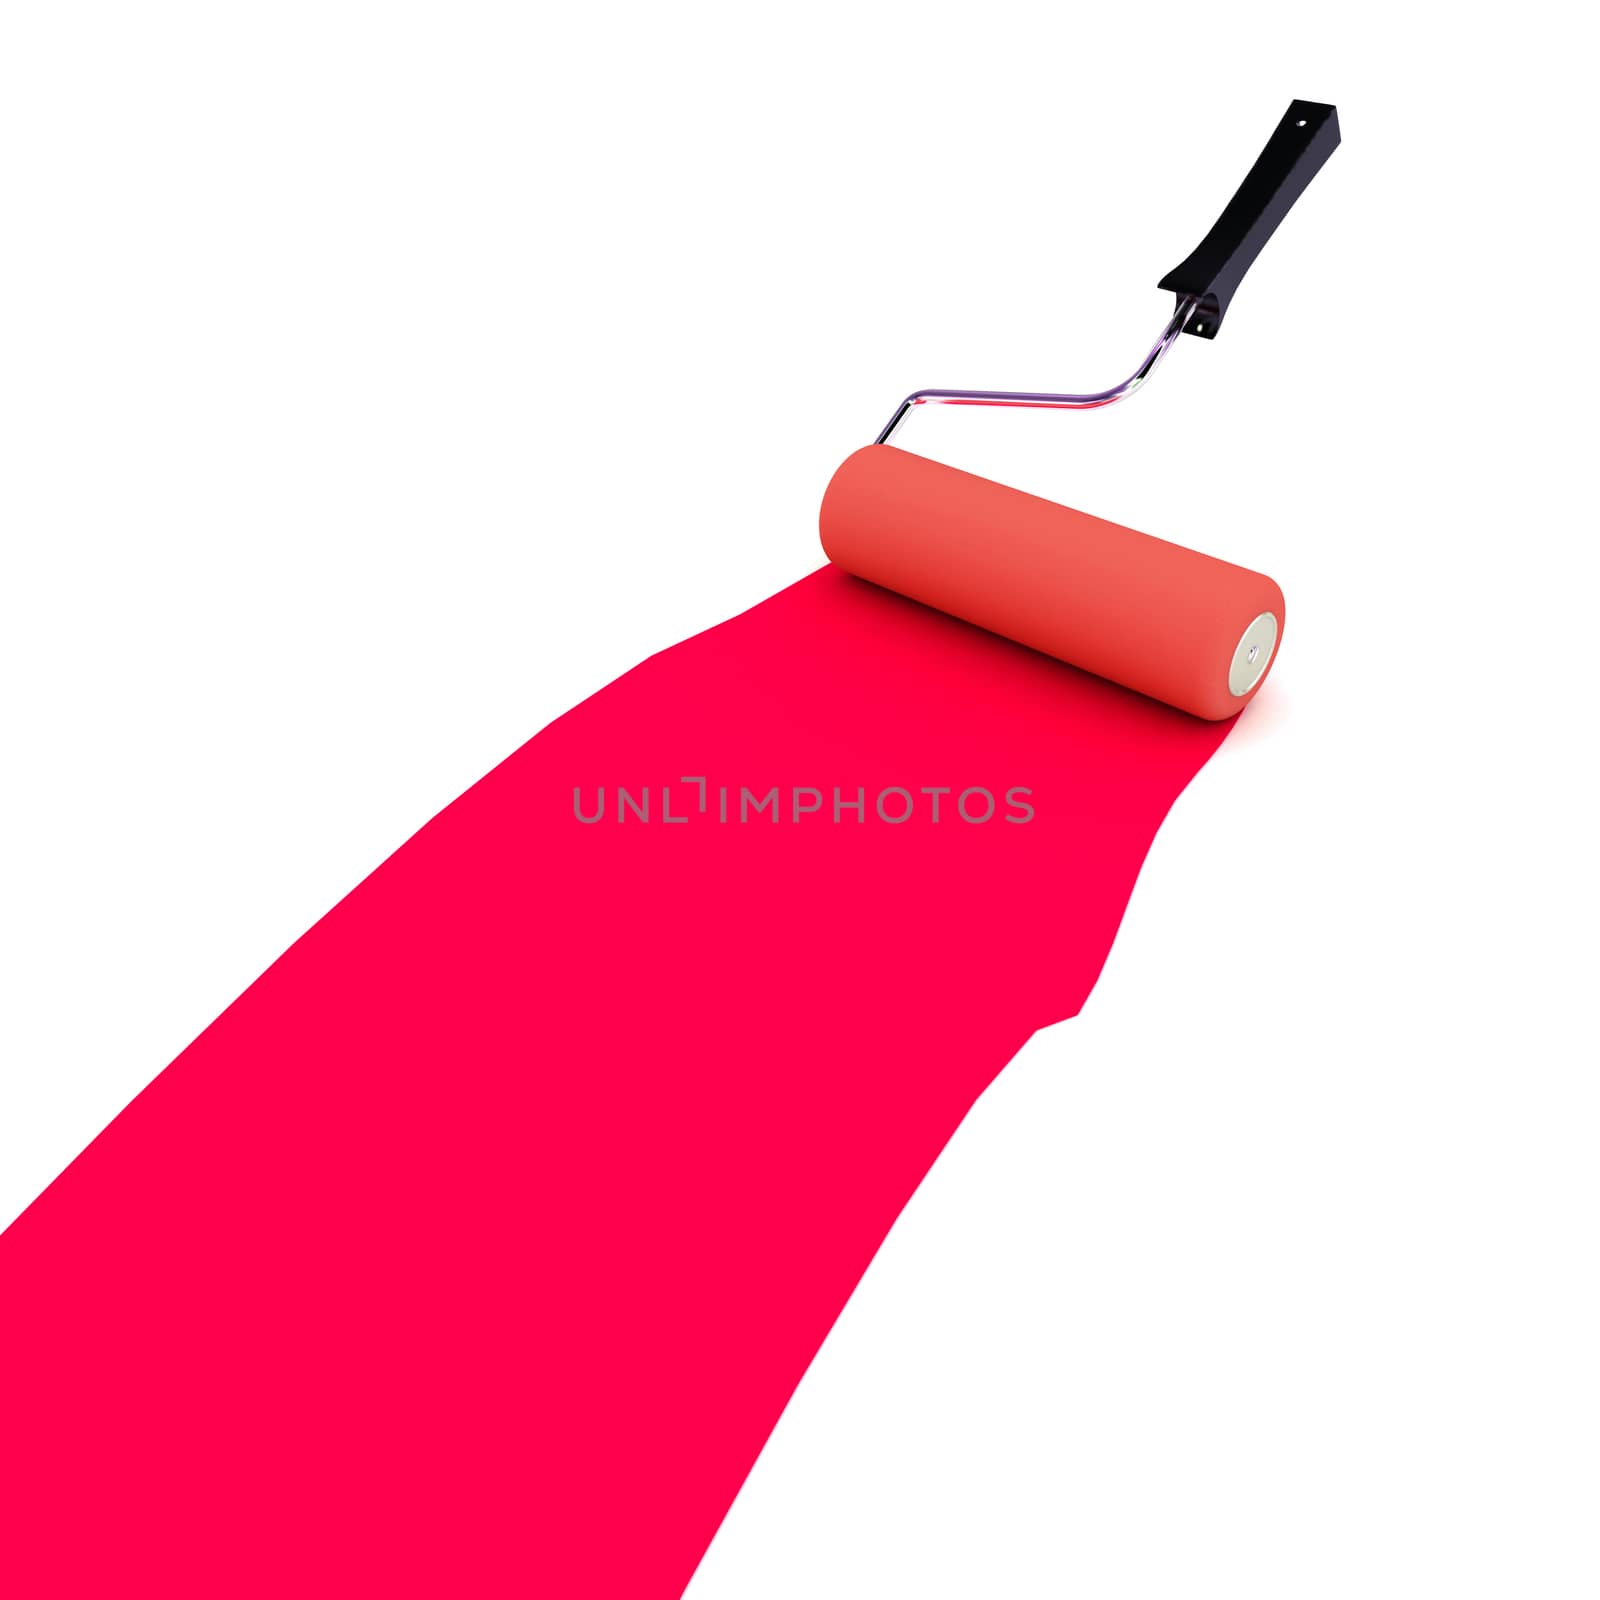 A Colourful 3d Rendered Red Paint Roller